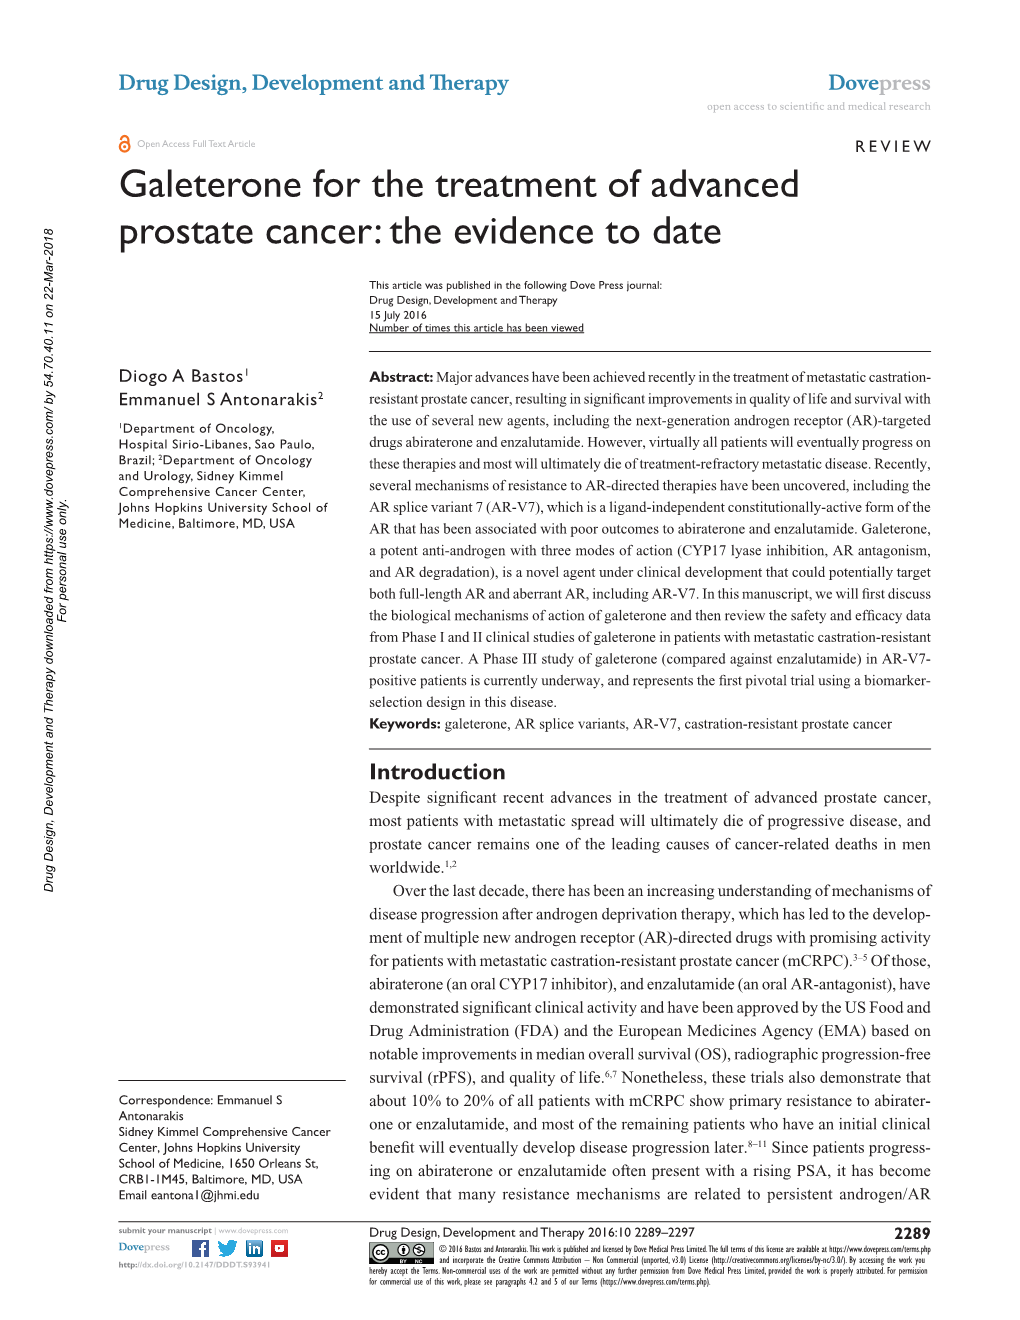 Galeterone for the Treatment of Advanced Prostate Cancer: the Evidence to Date